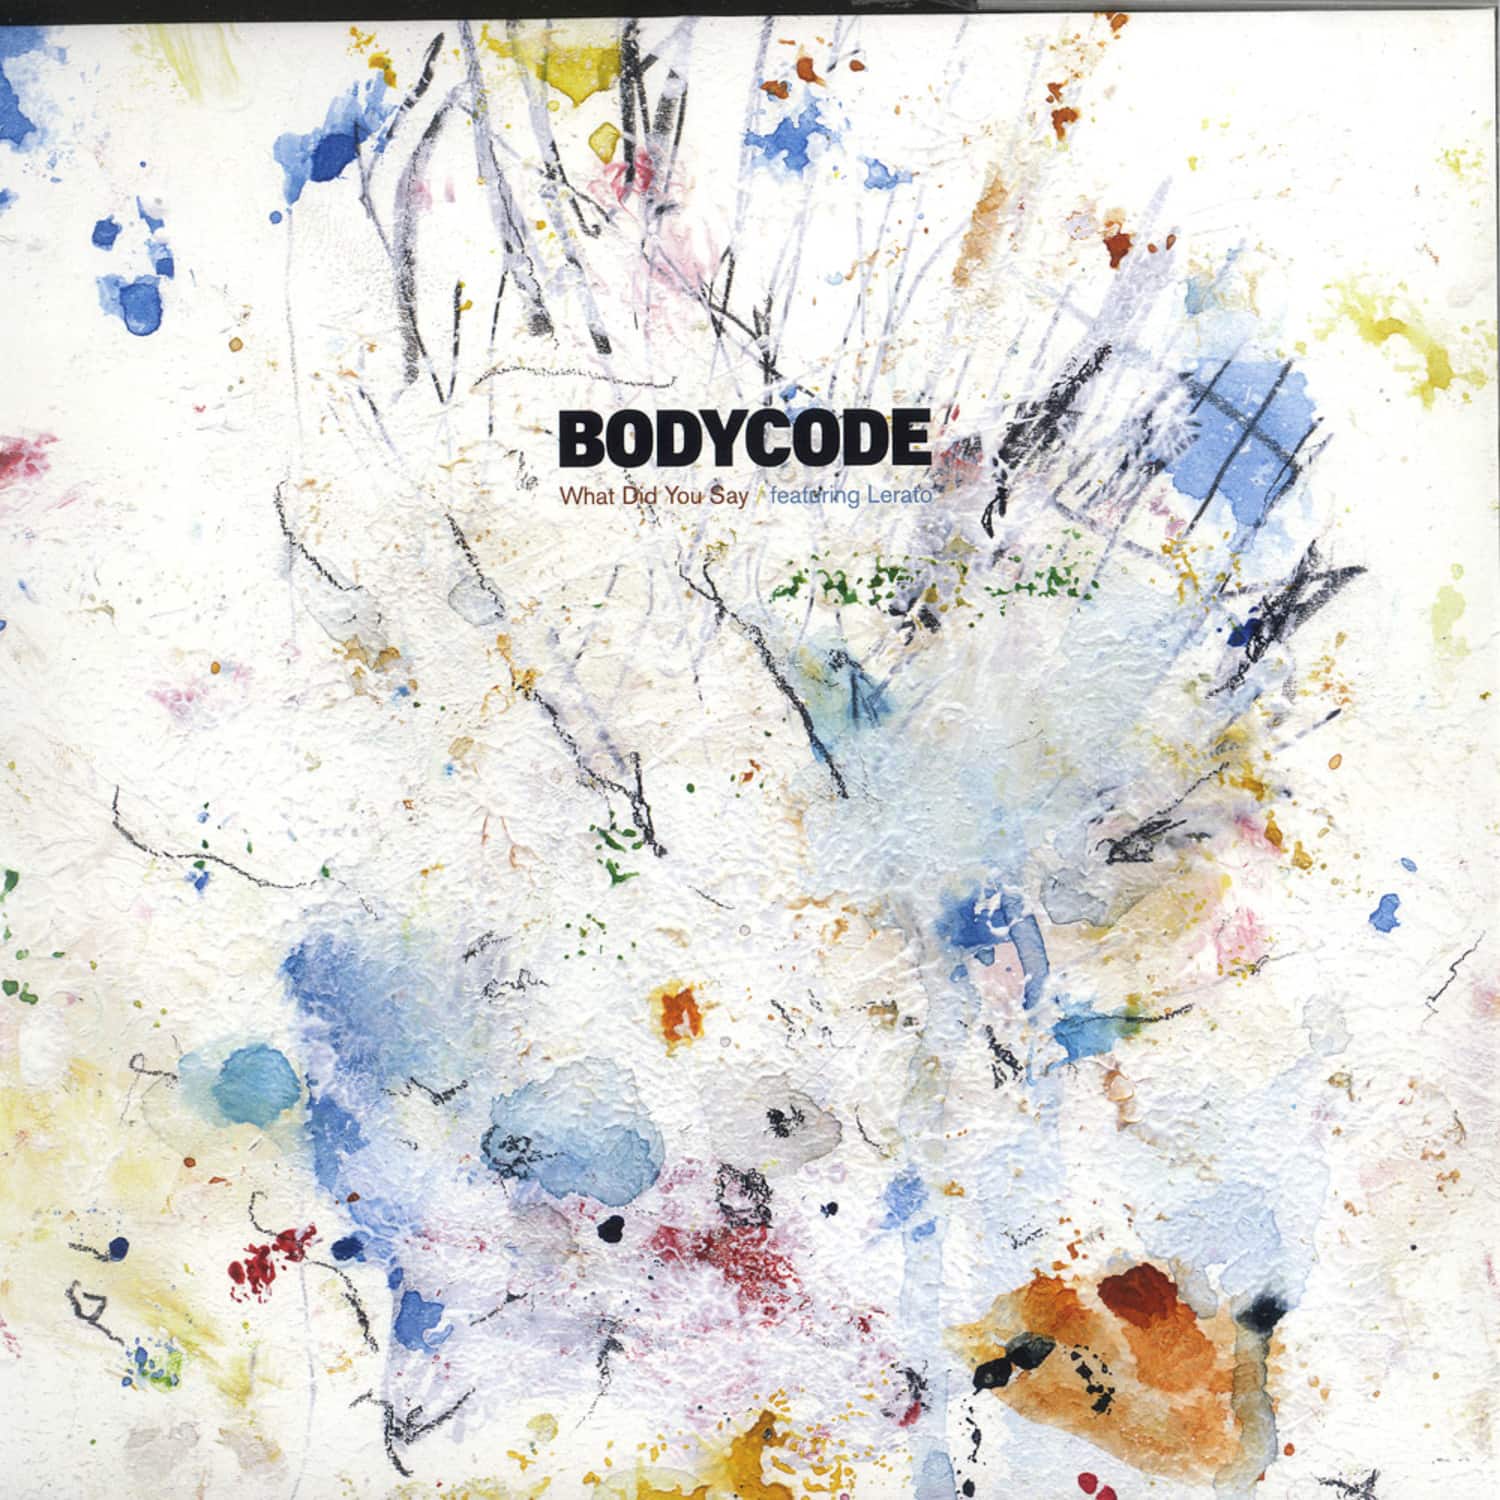 Bodycode - WHAT DID YOU SAY